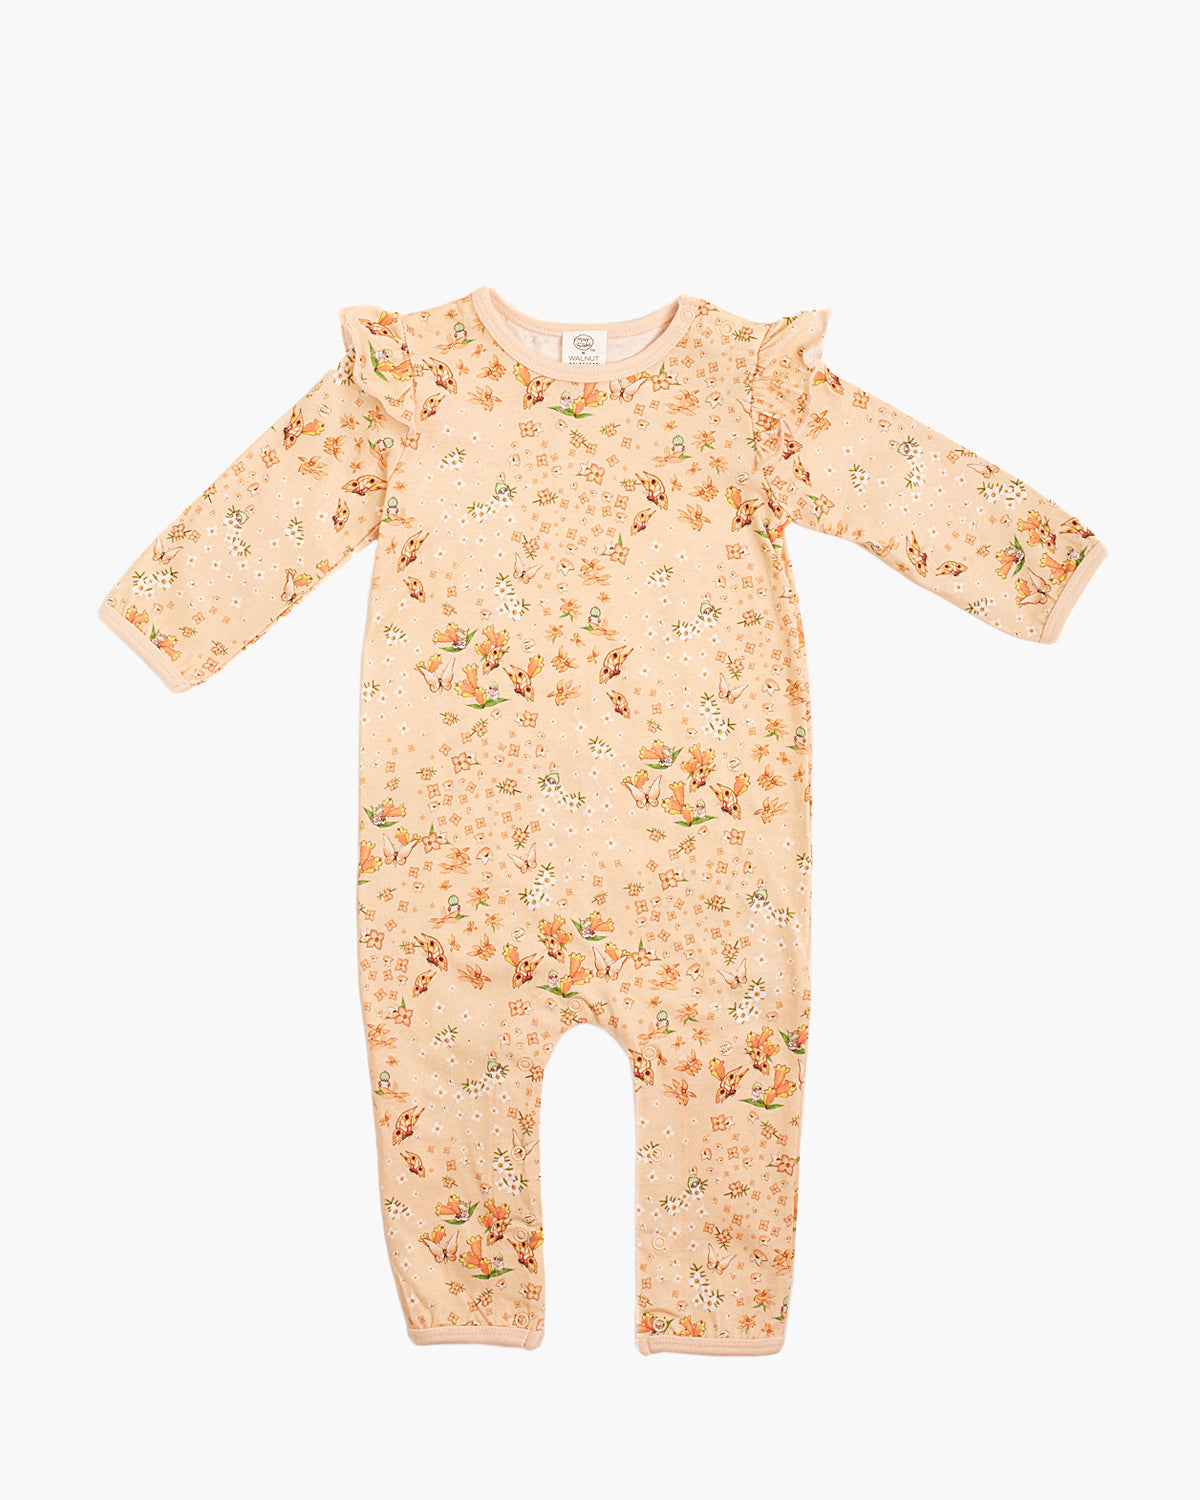 May Gibbs Scout Frill Onesie